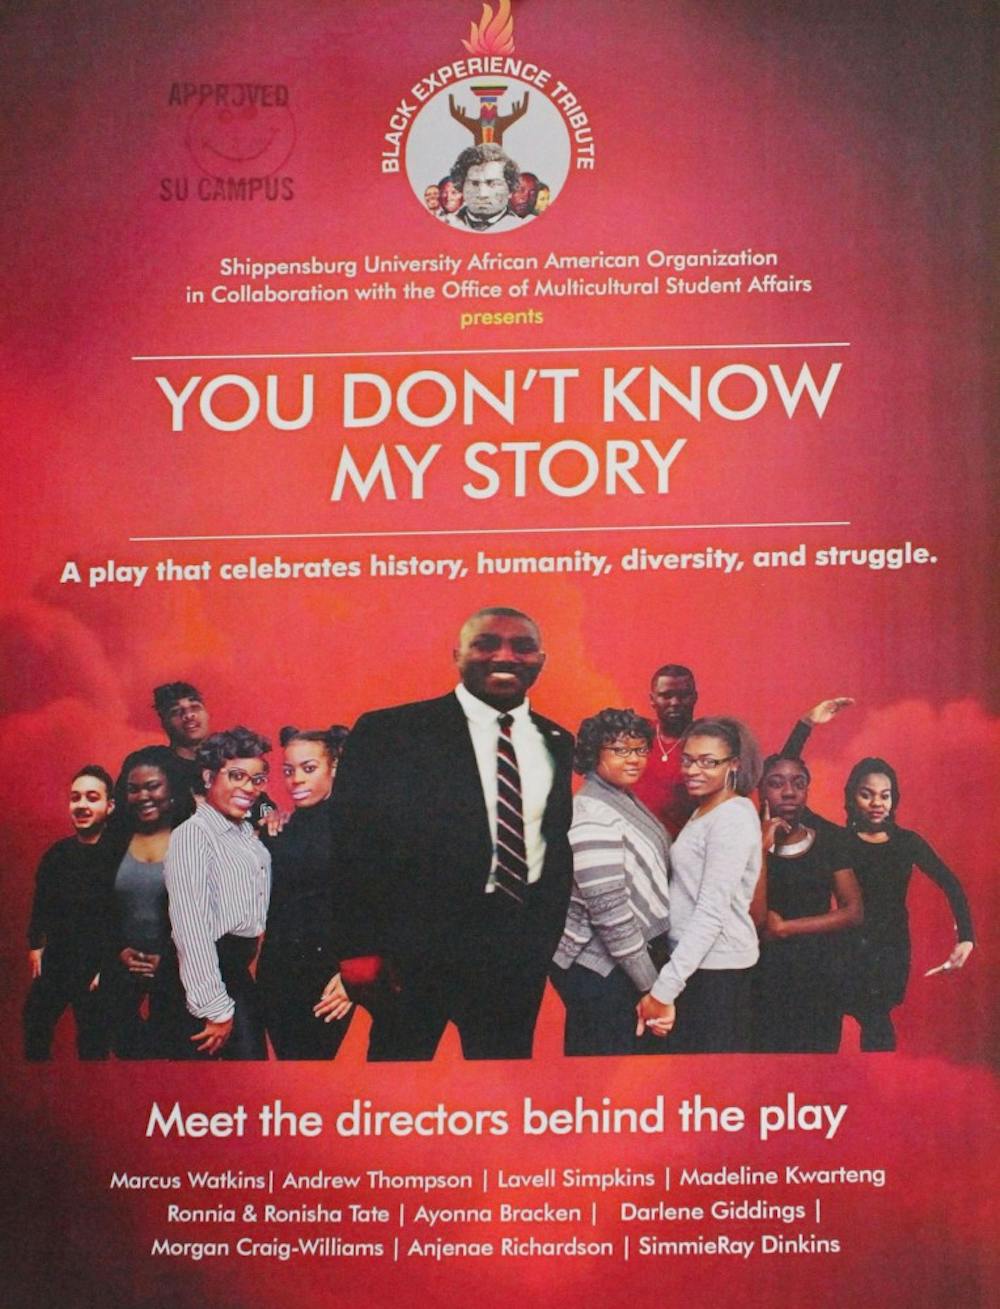 ‘You Don’t Know My Story’ promotes culture